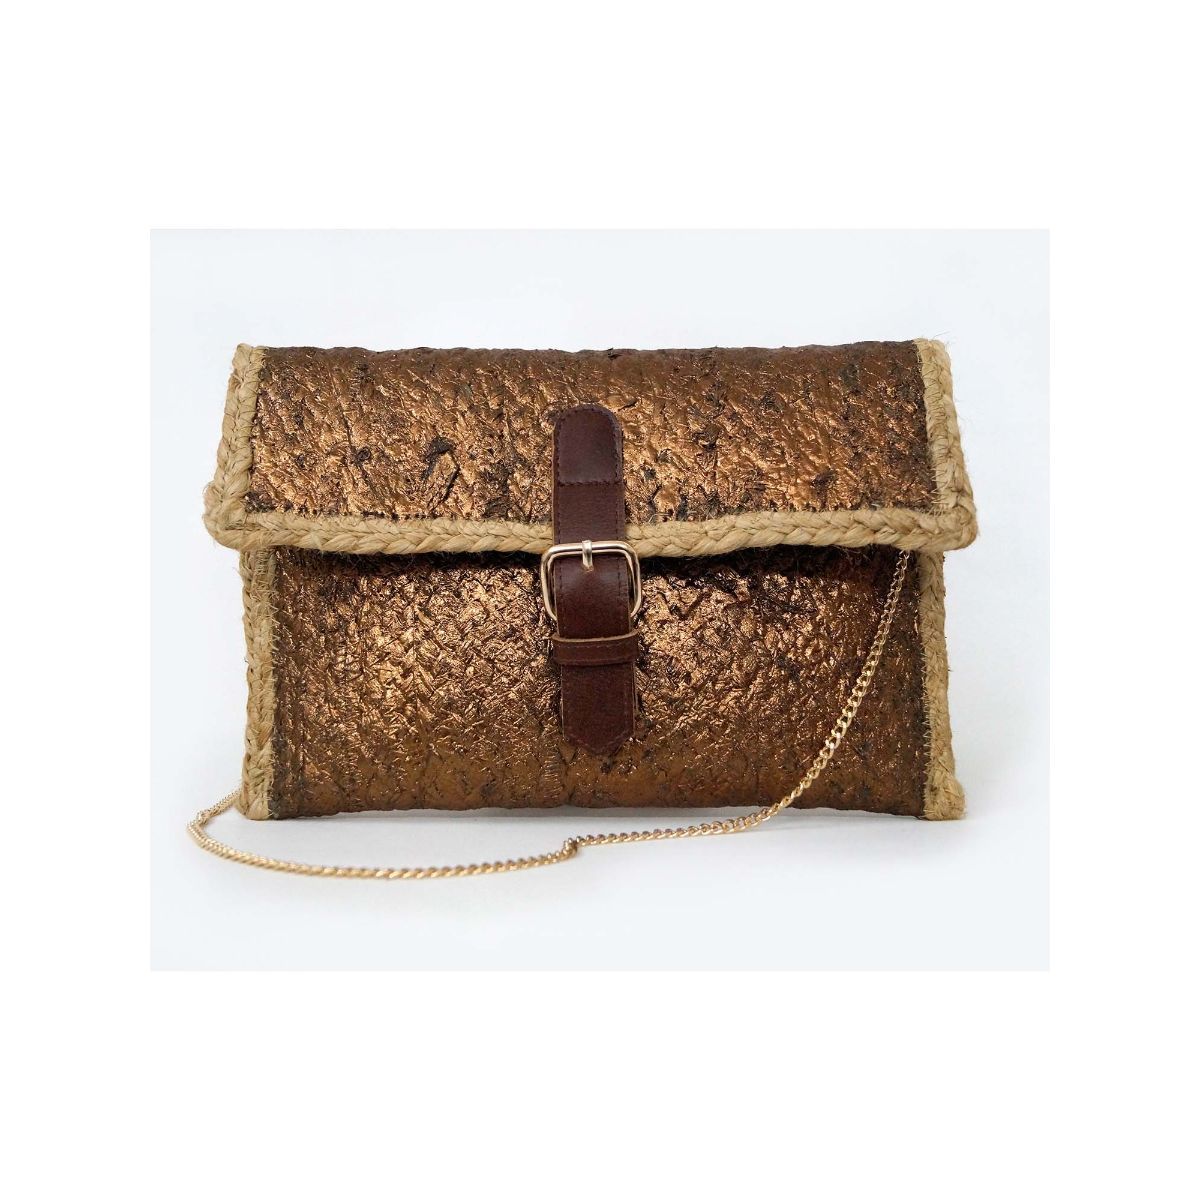 Handbags: Buy Handbags and Clutch bags For Women online at best prices in  India - Amazon.in